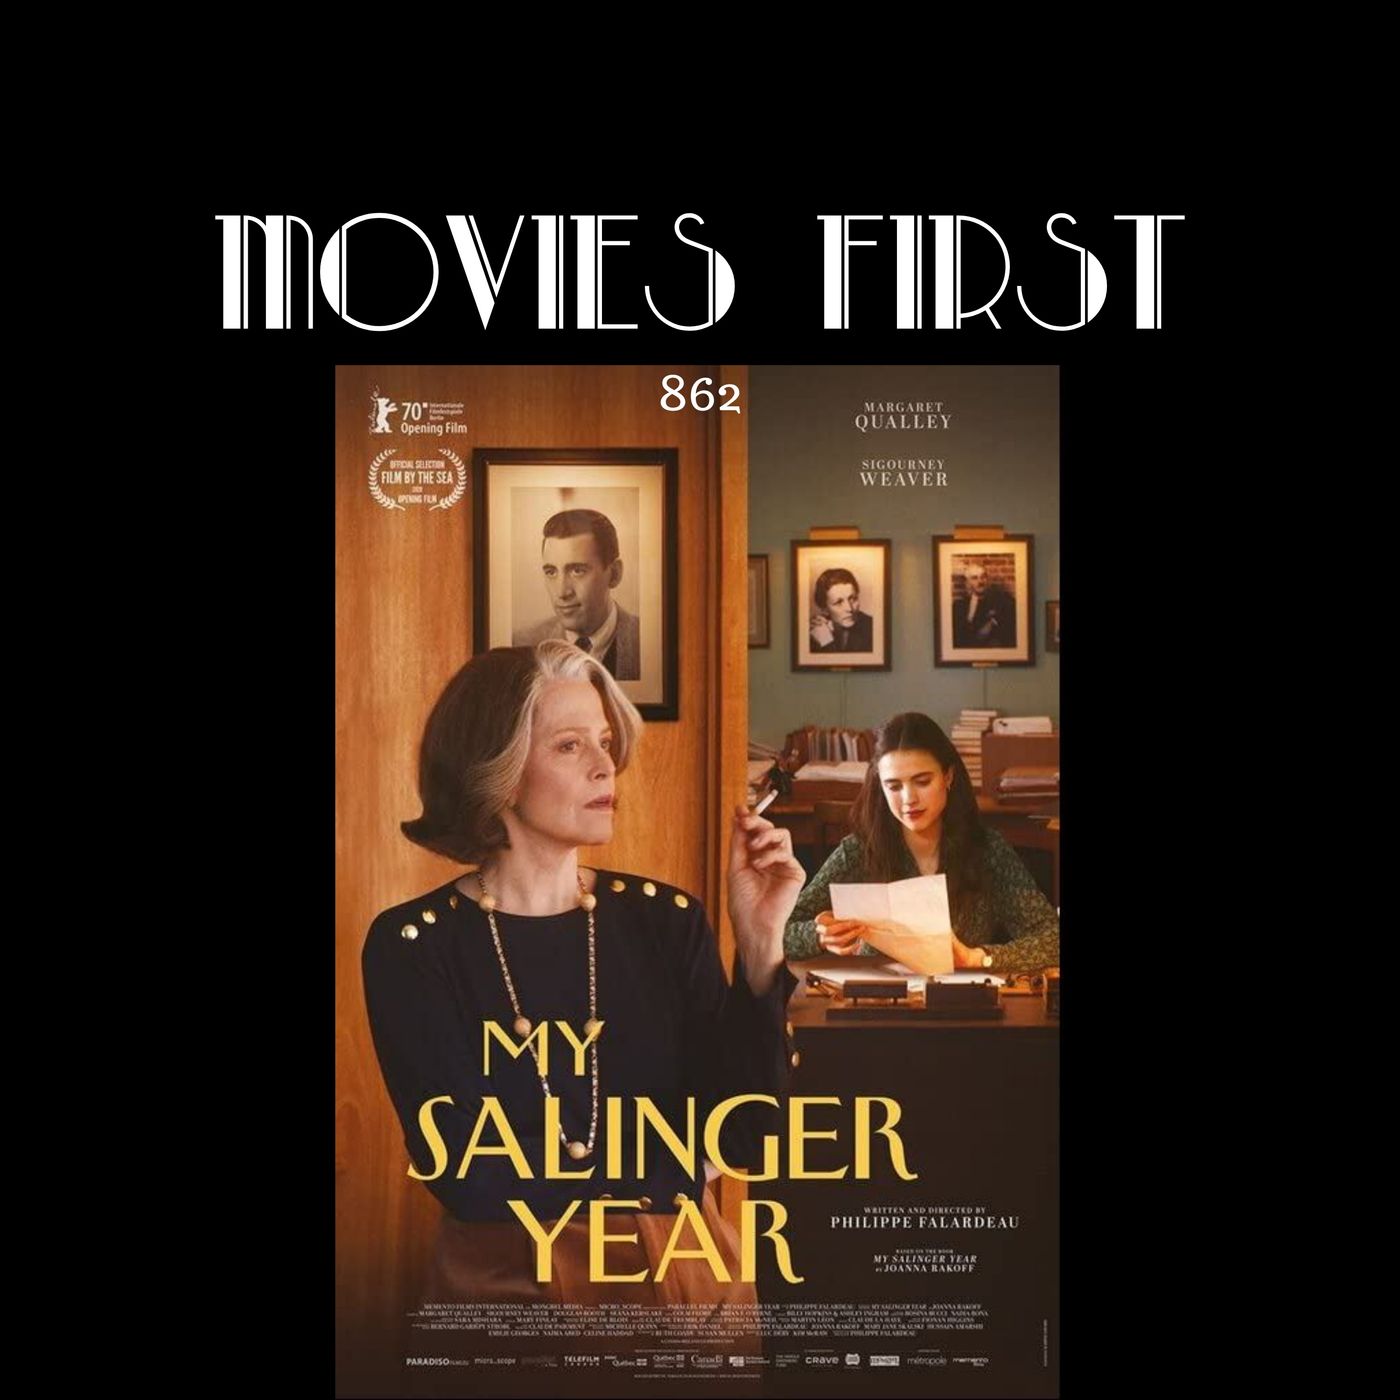 My Salinger Year (Drama) (the @MoviesFirst review)